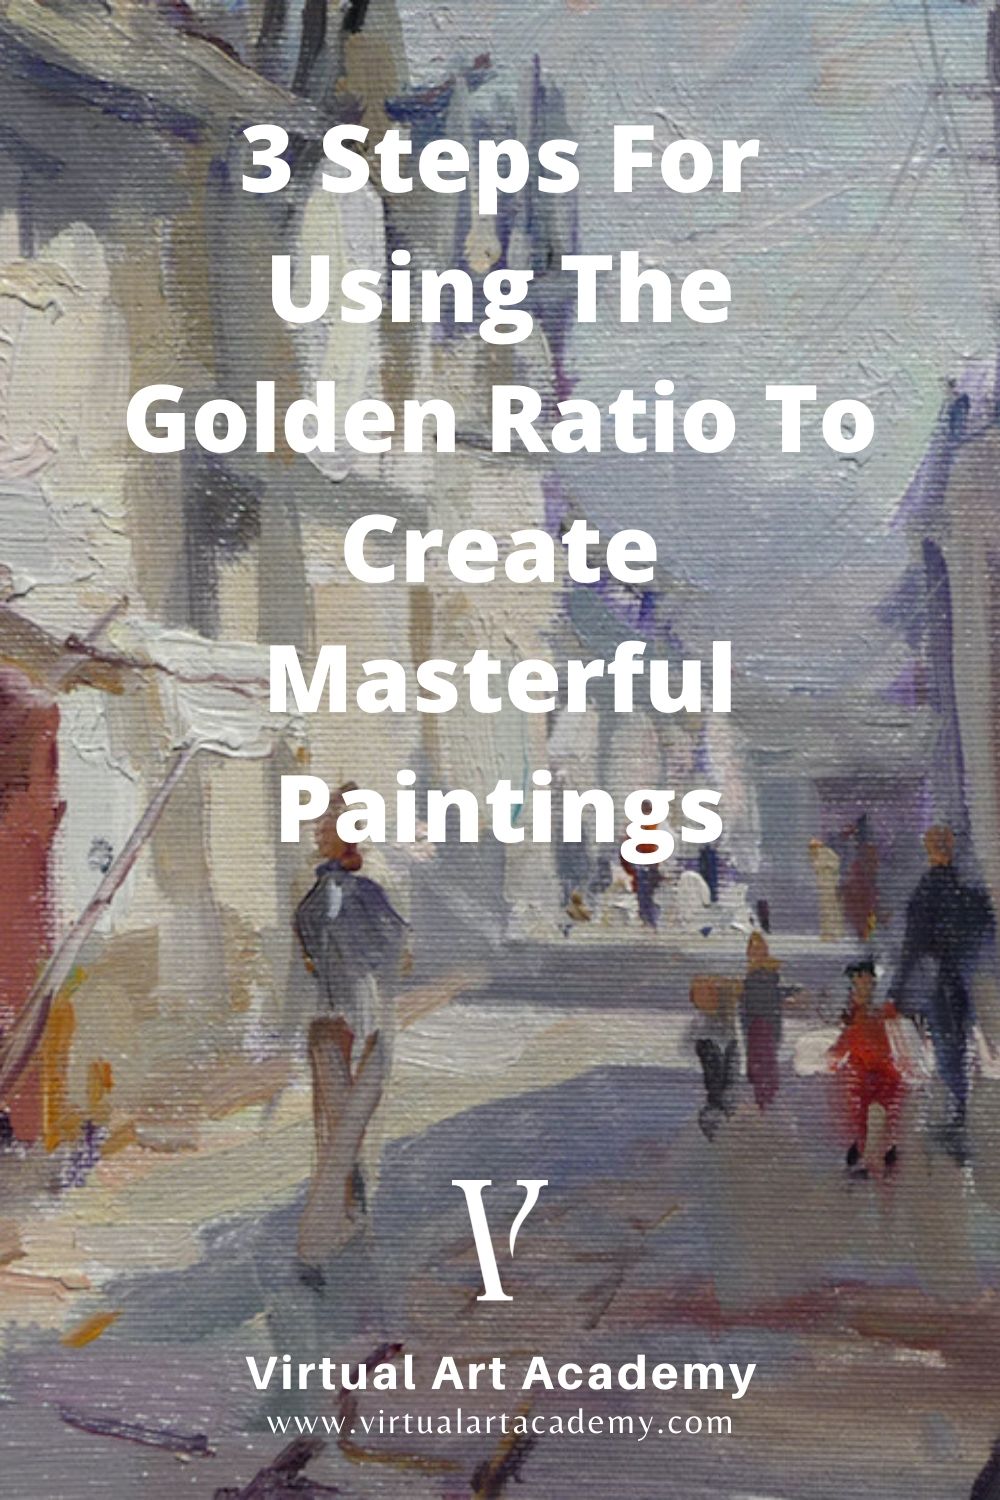 3 Steps For Using The Golden Ratio To Create Masterful Paintings